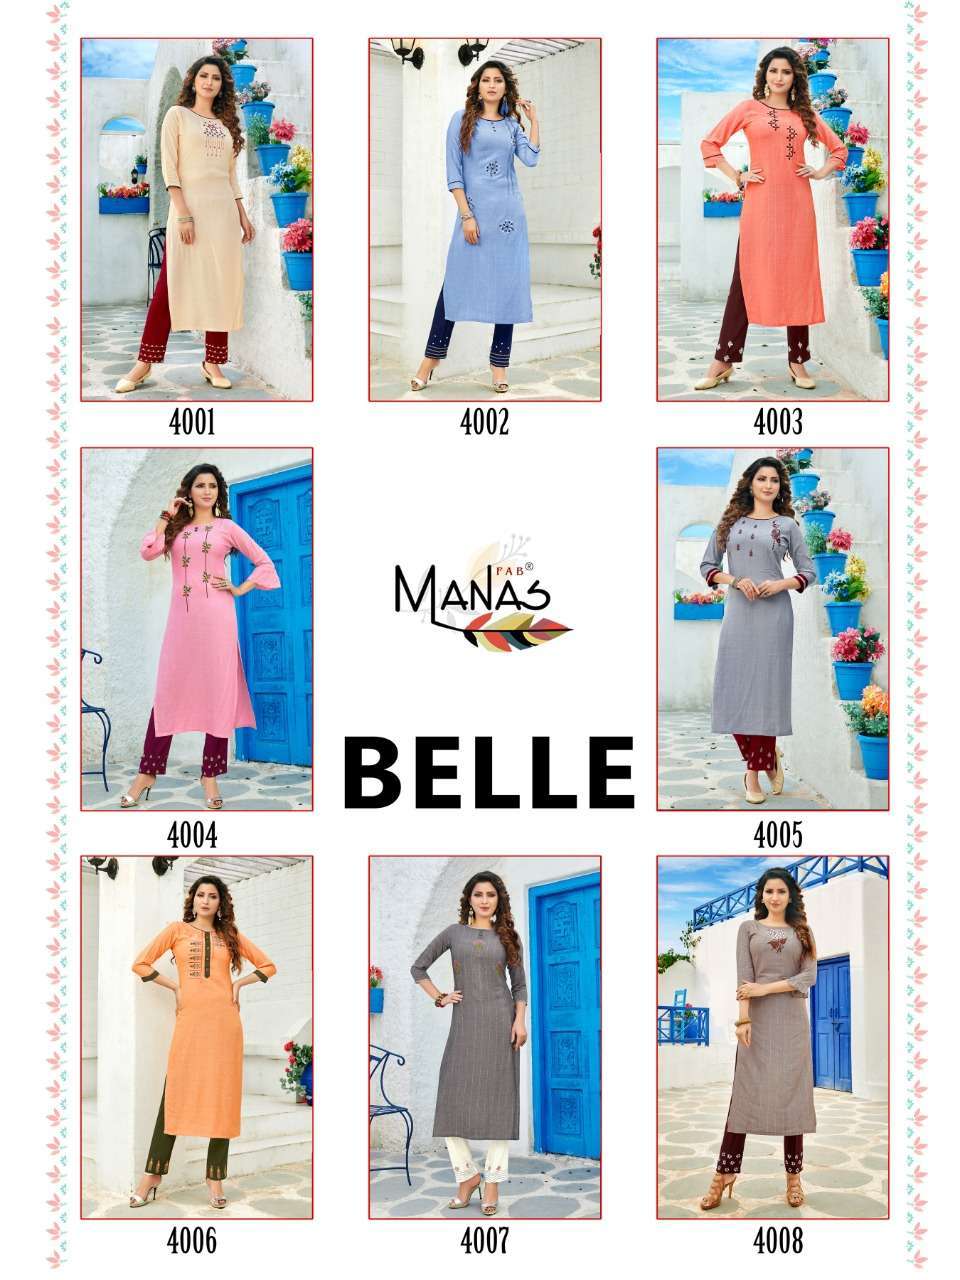 MANAS FAB LAUNCHES BELLE RAYON EMBROIDERY WORK KURTI